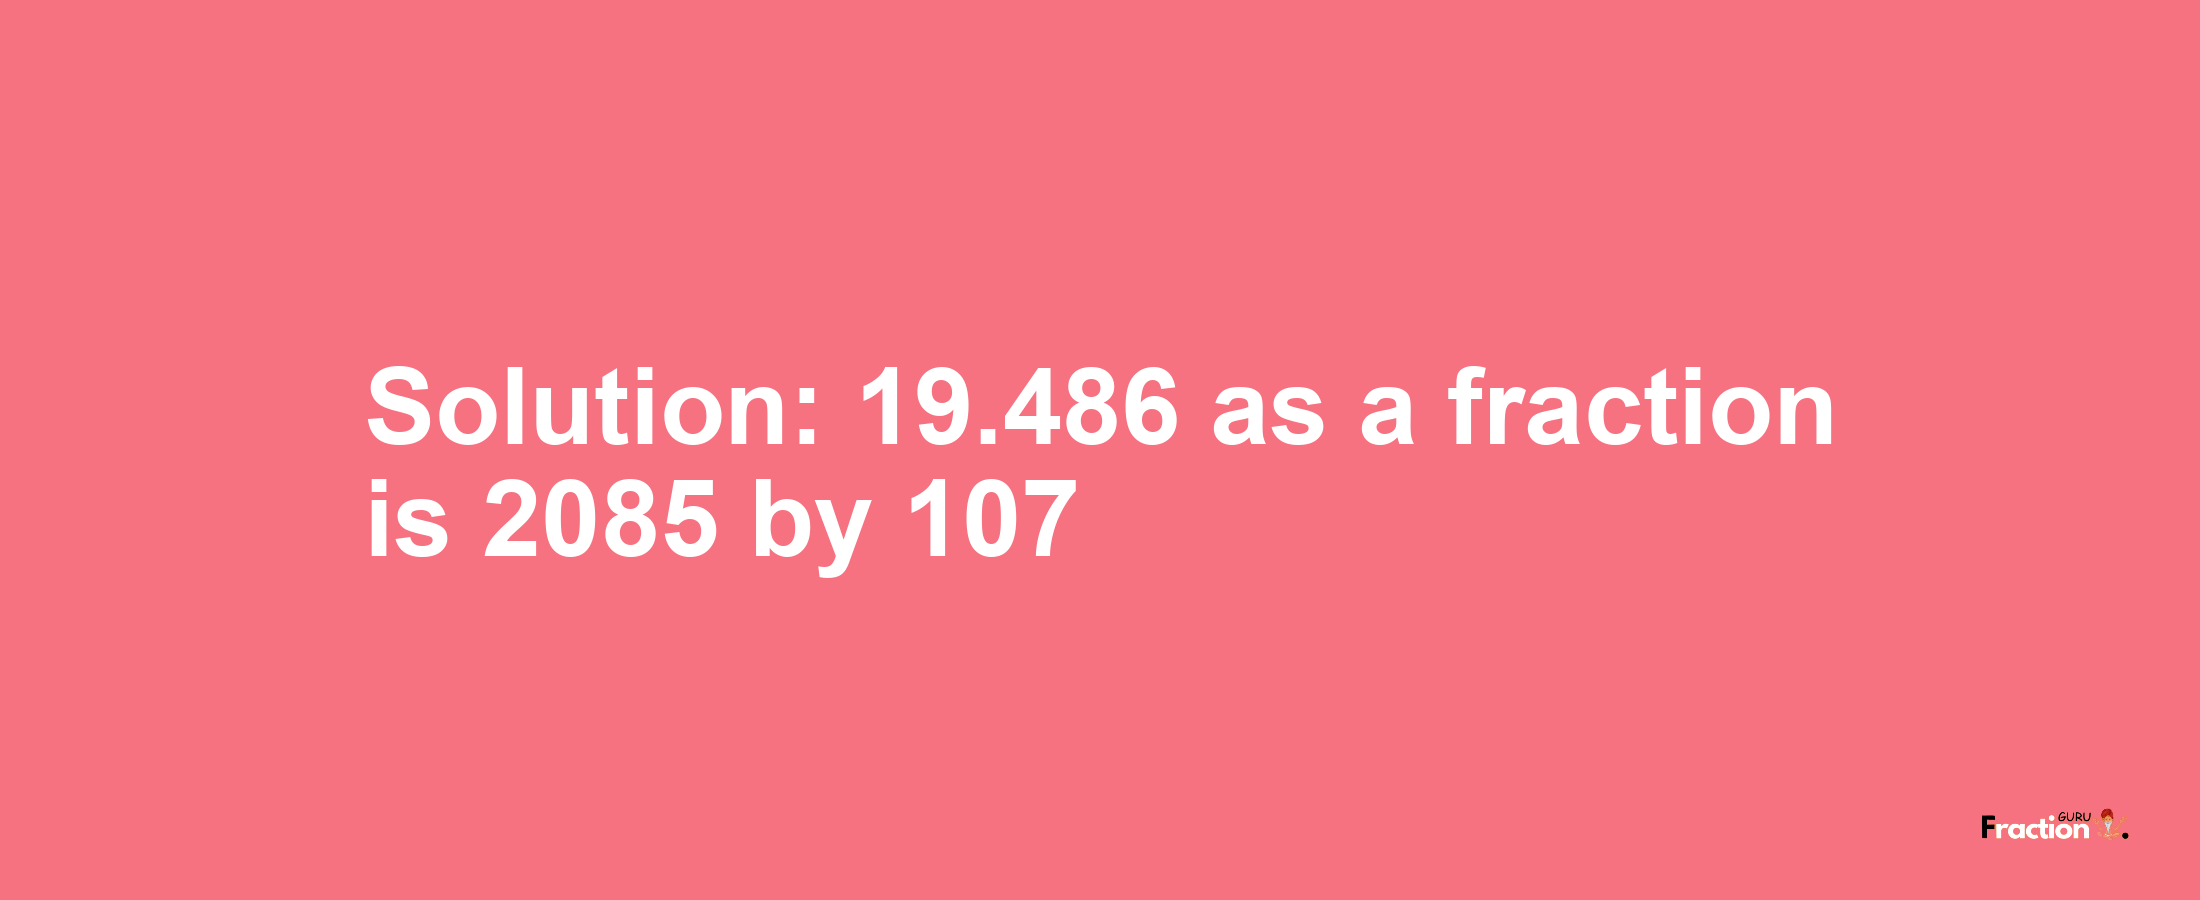 Solution:19.486 as a fraction is 2085/107